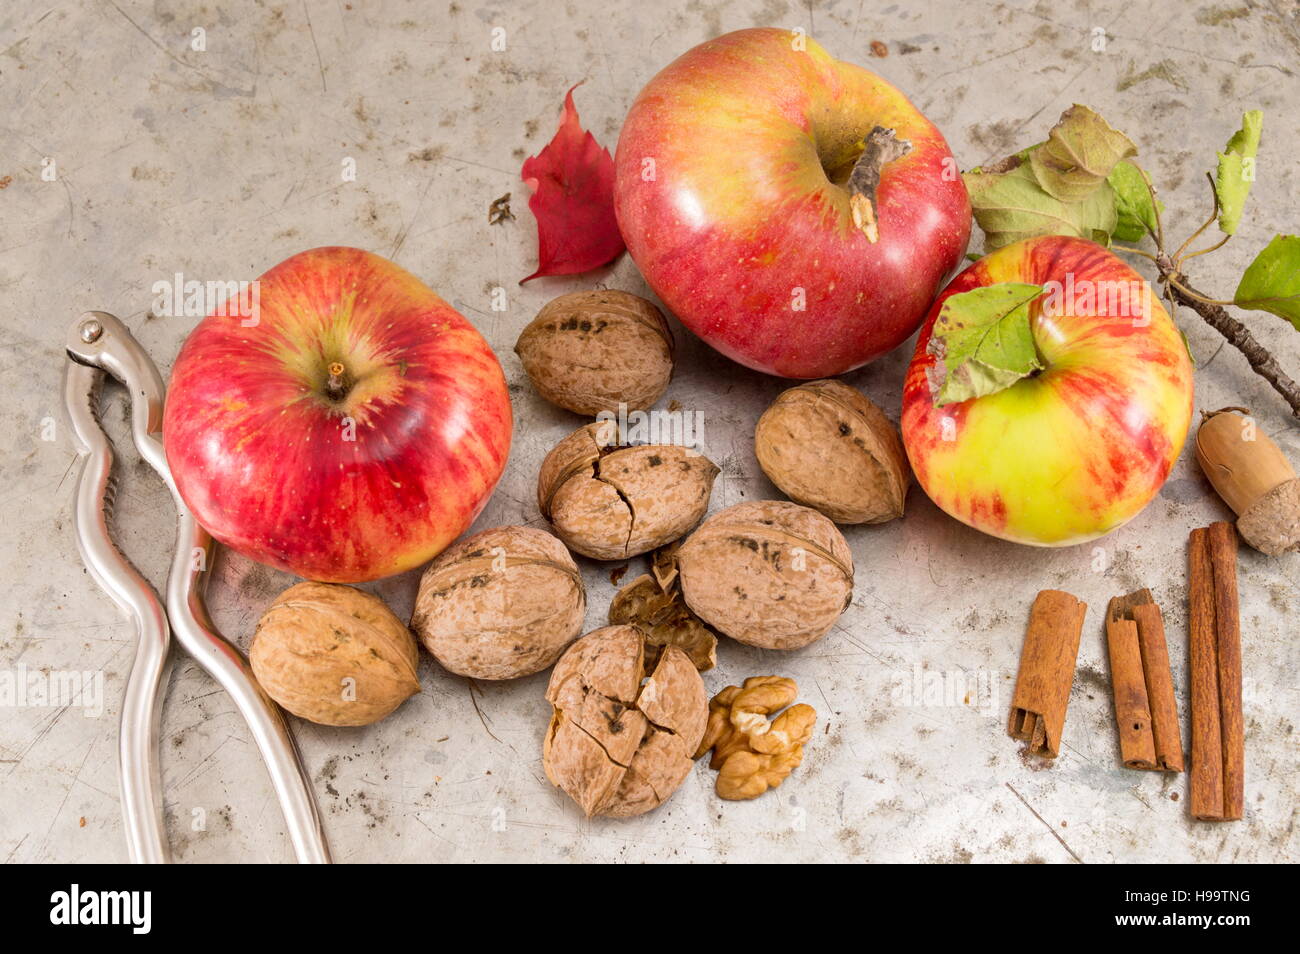 Apples, walnuts and nuts cracker on a table Stock Photo